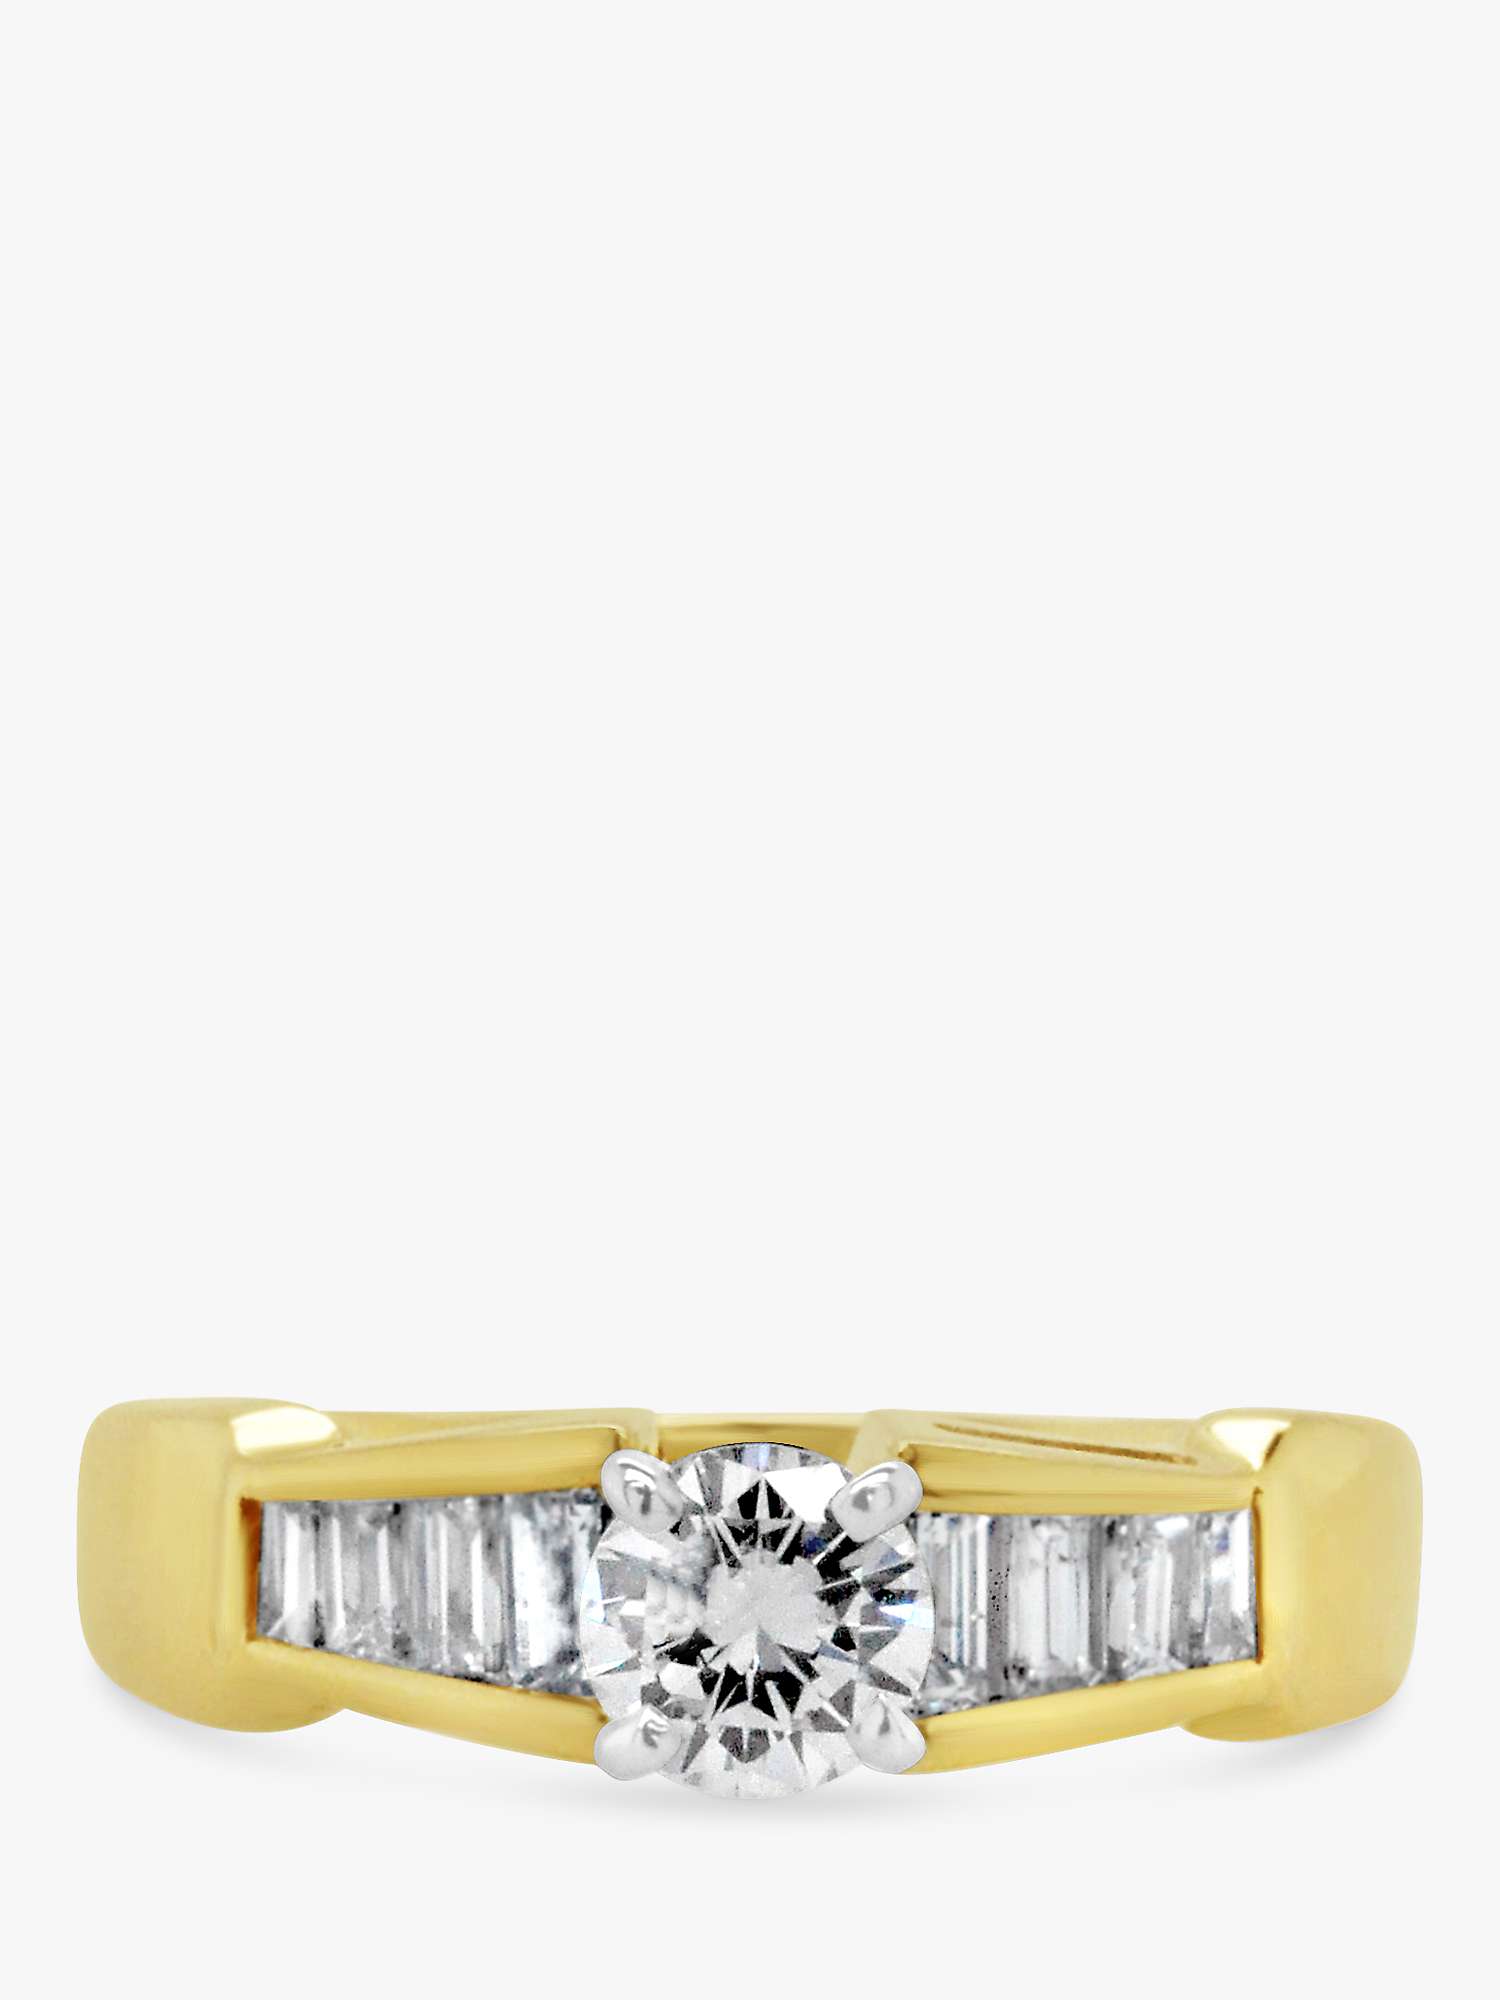 Buy Milton & Humble Jewellery Second Hand 14ct Yellow and White Gold Diamond Ring Online at johnlewis.com